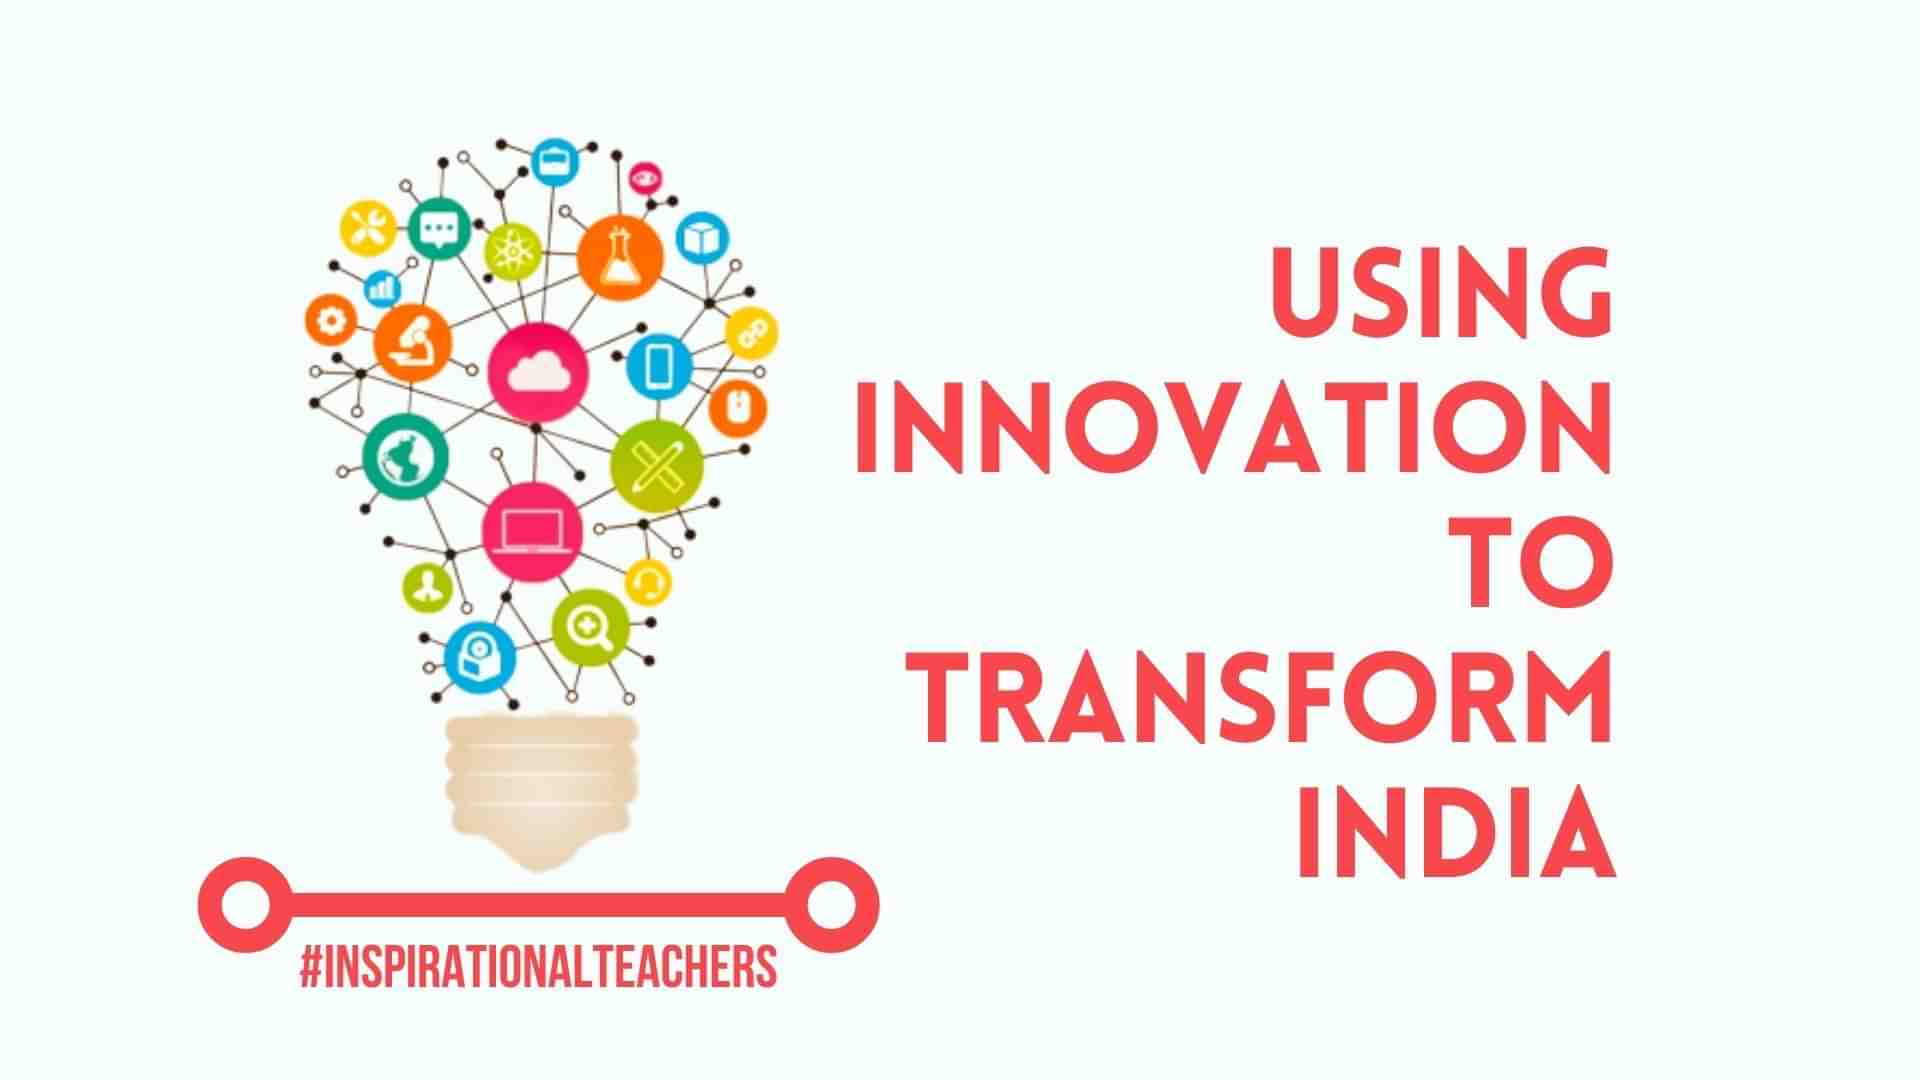 Meet #InspirationalTeachers who are using Innovation and Edutainment to Transform the Education System